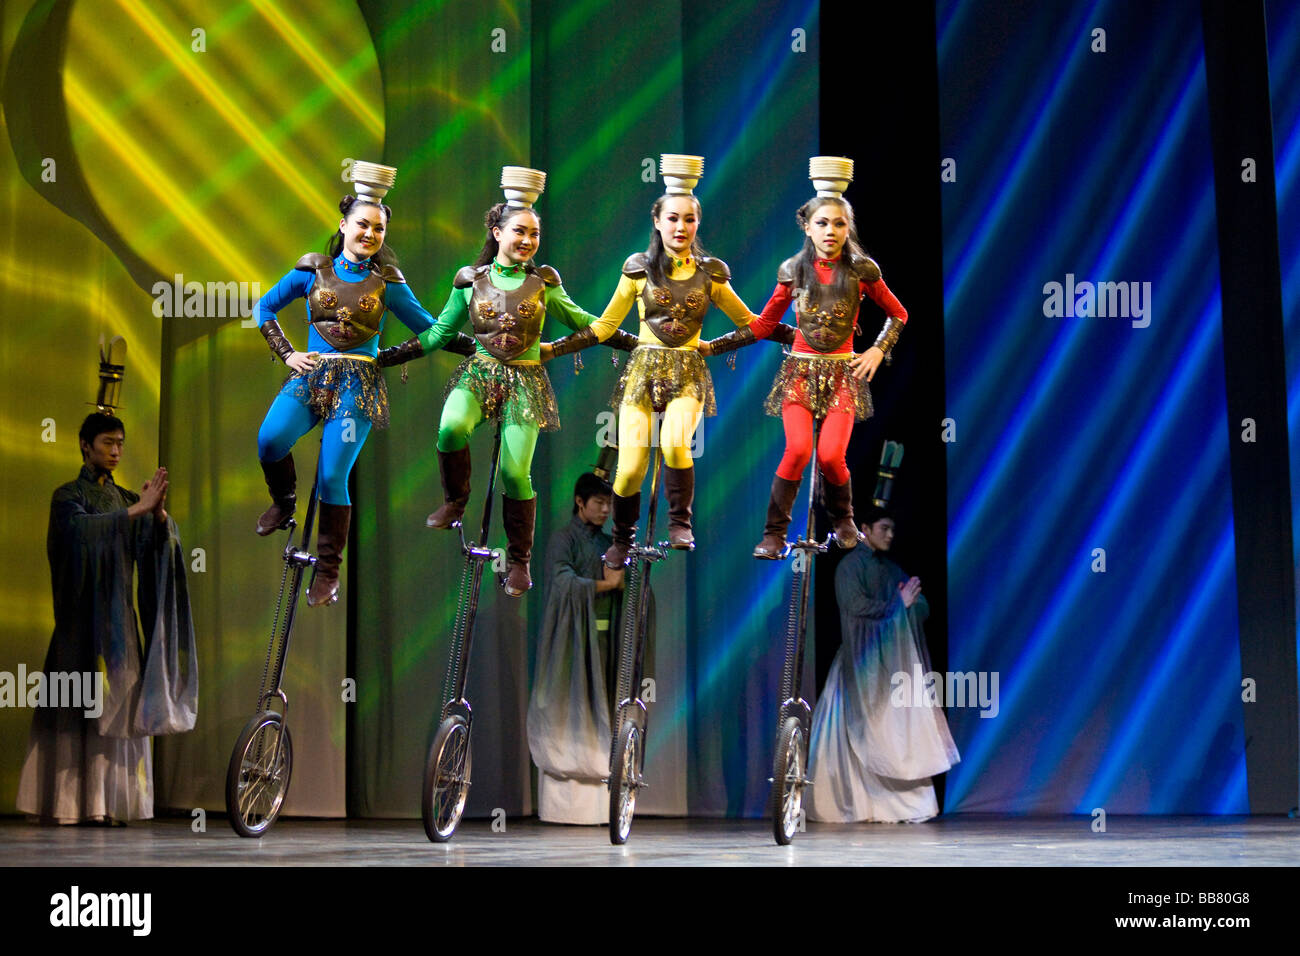 The Chinese National Circus from Shenyang performing the show Confucius, a journey through time showing 2500 years of Chinese p Stock Photo